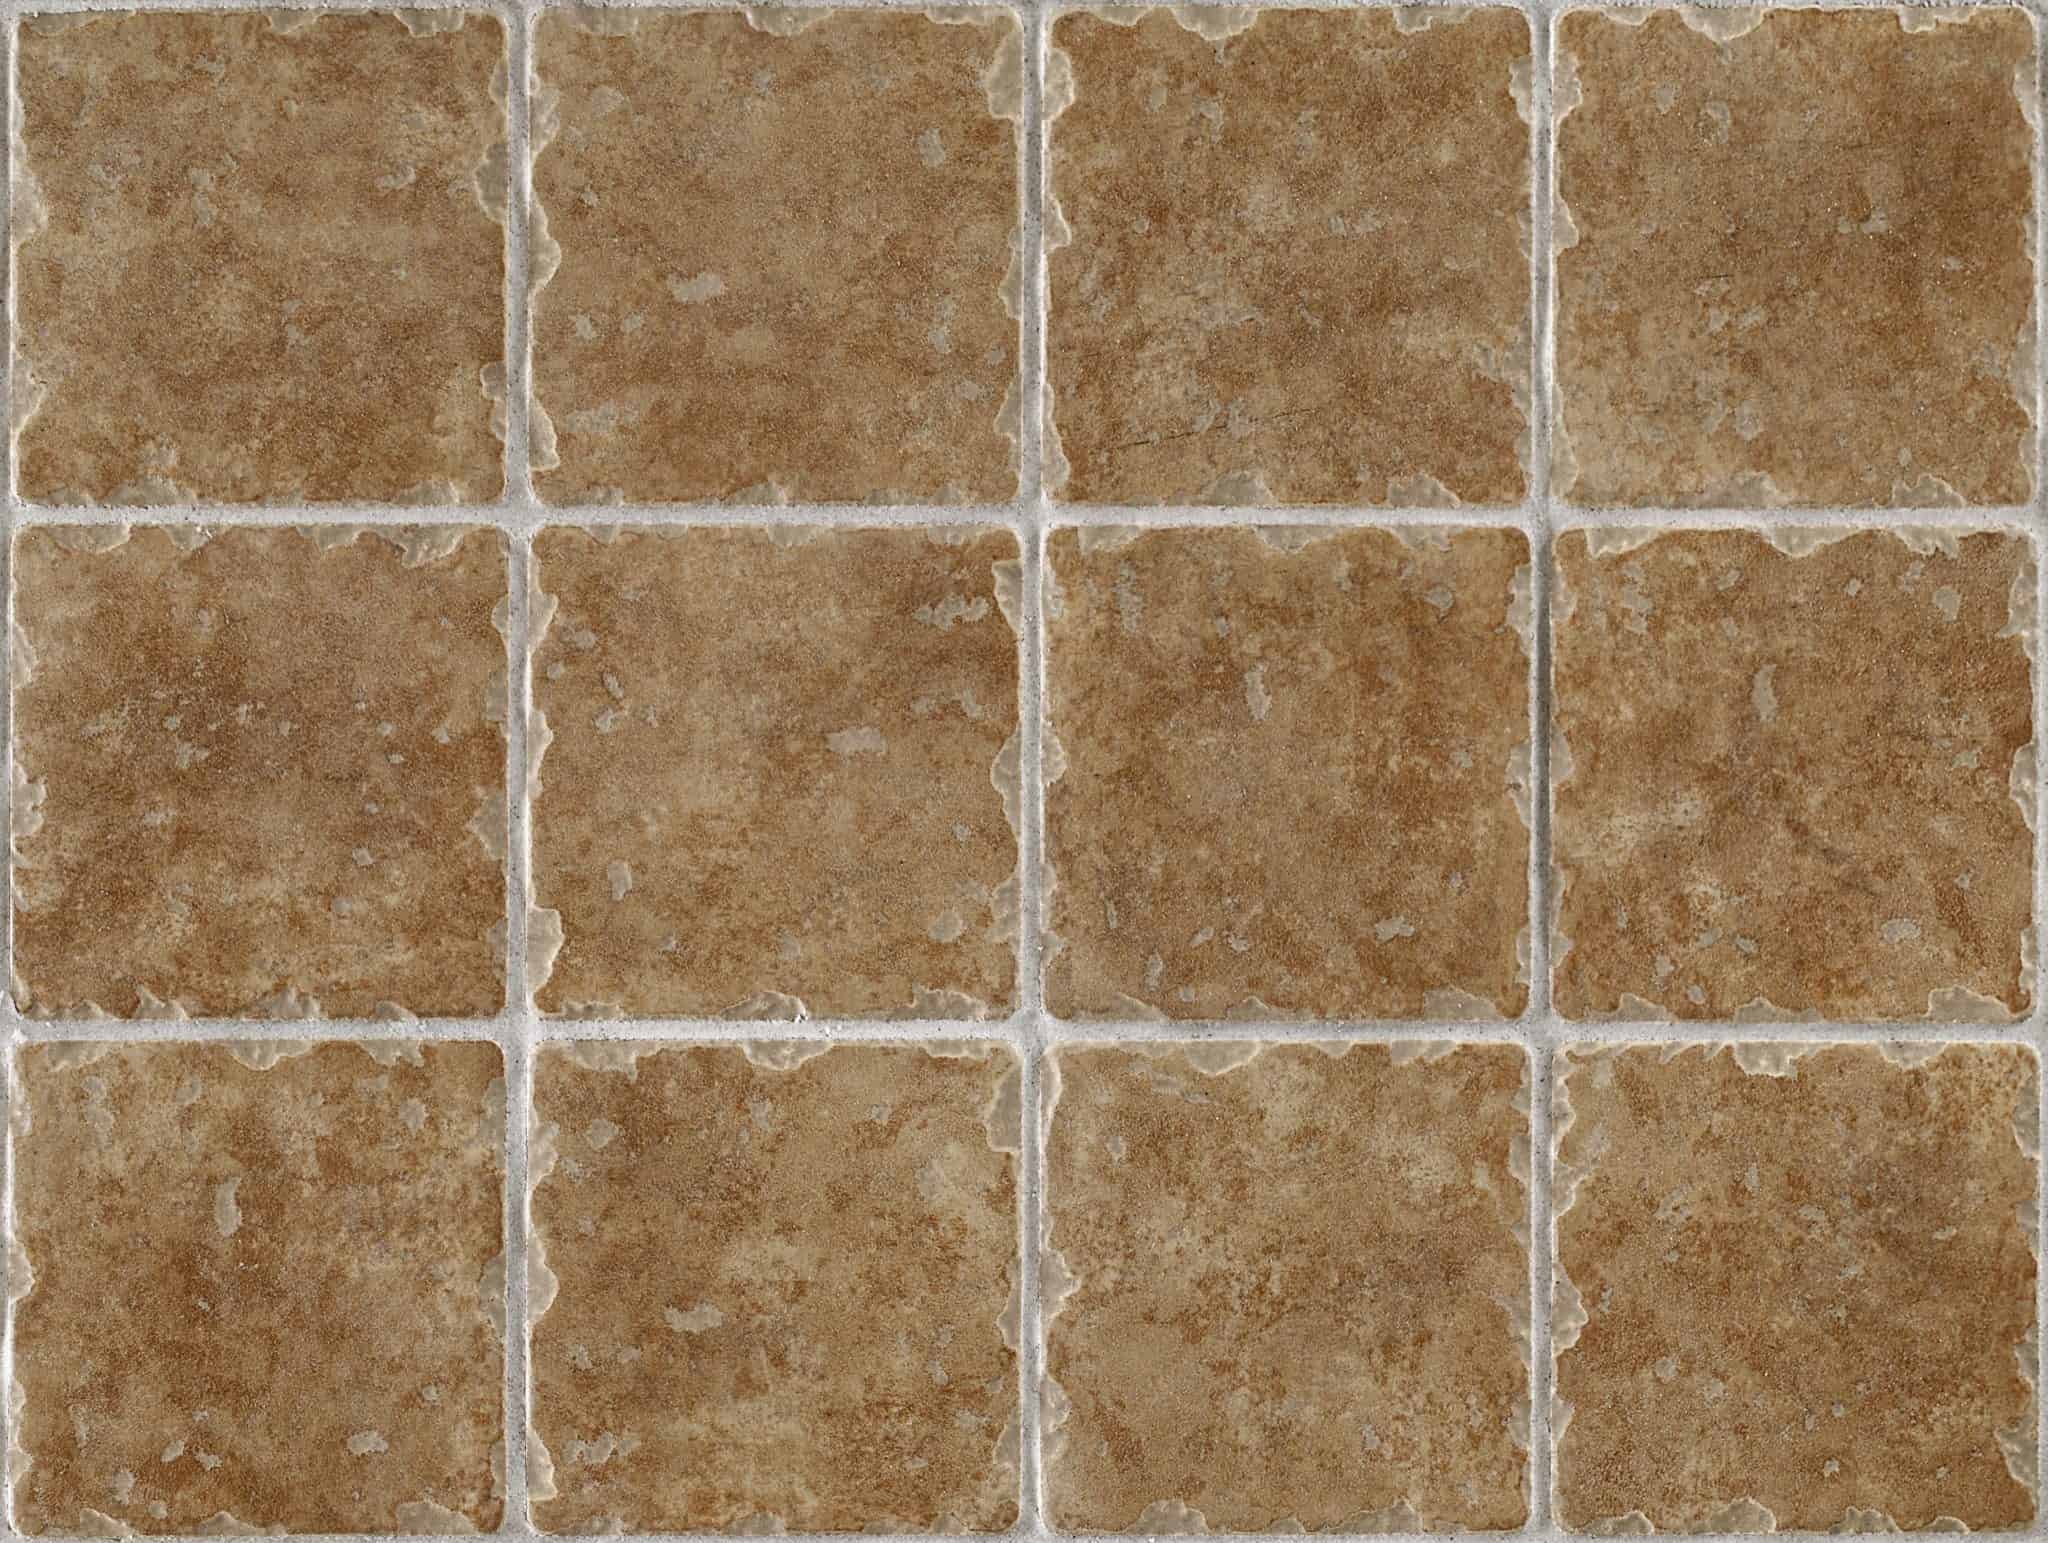 Types of Tile and Cleaning